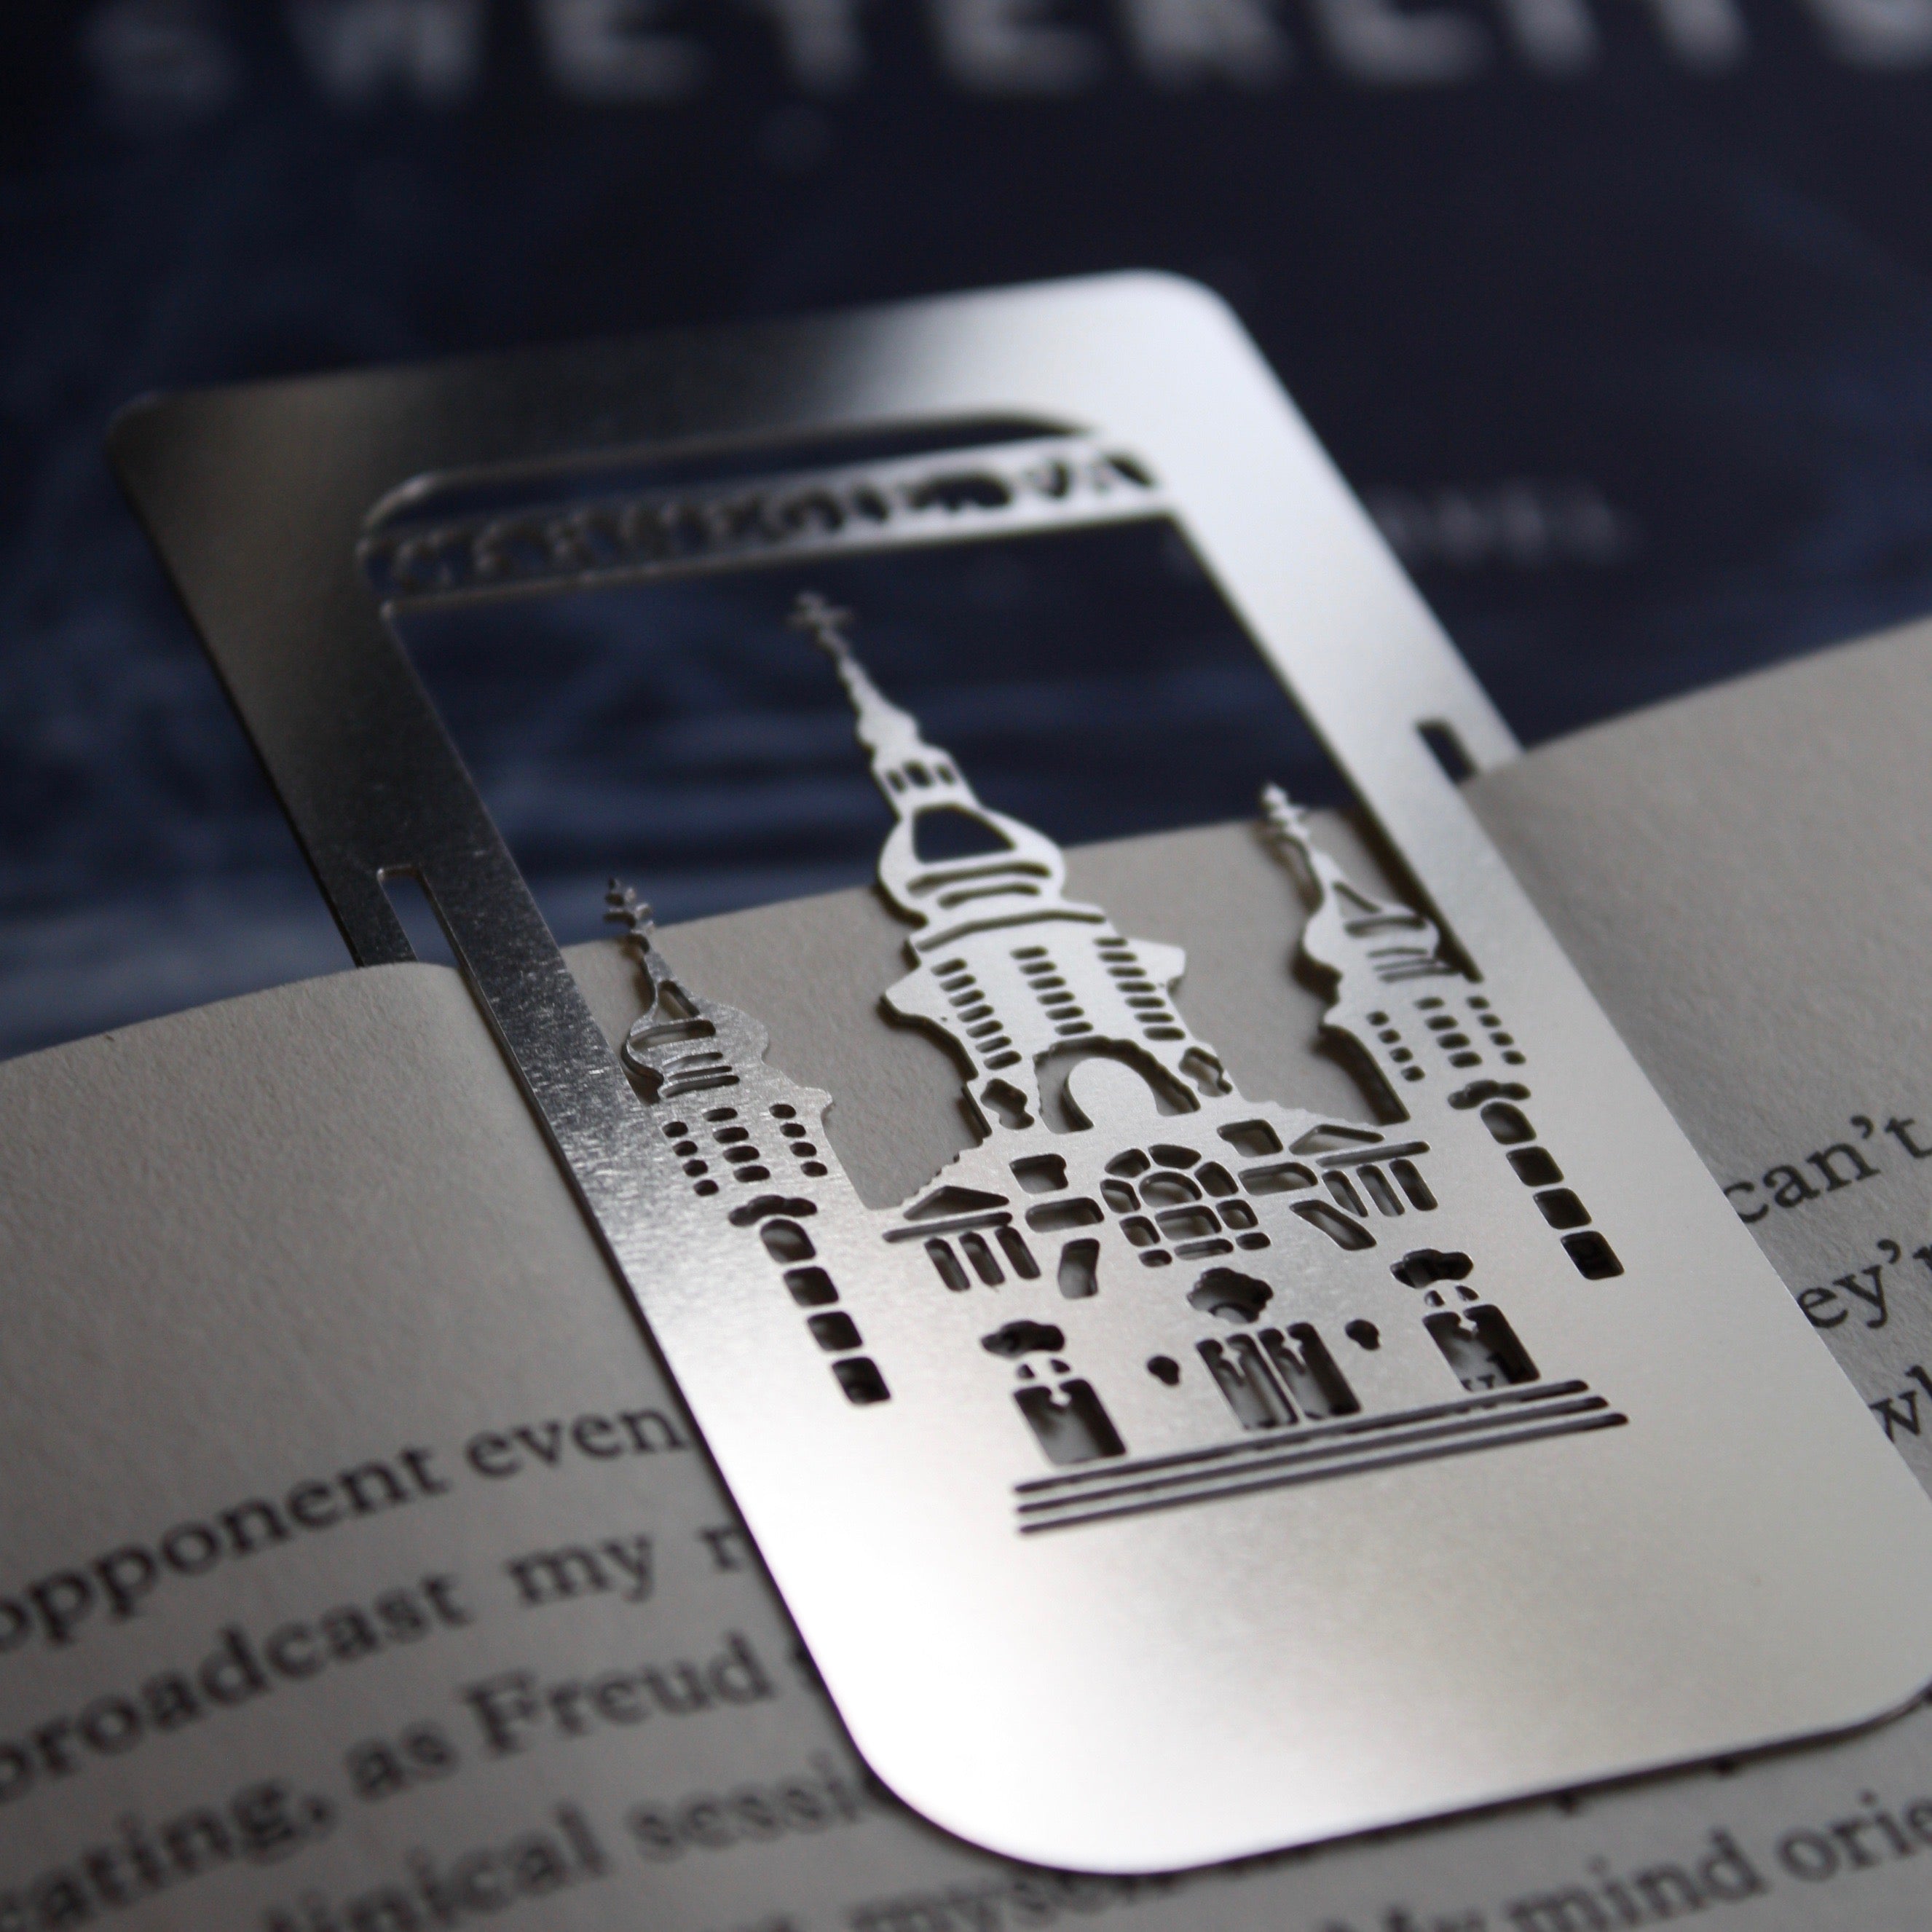 Carnegie, PA clip-on bookmark by Pittsburgh designer Audra Azoury